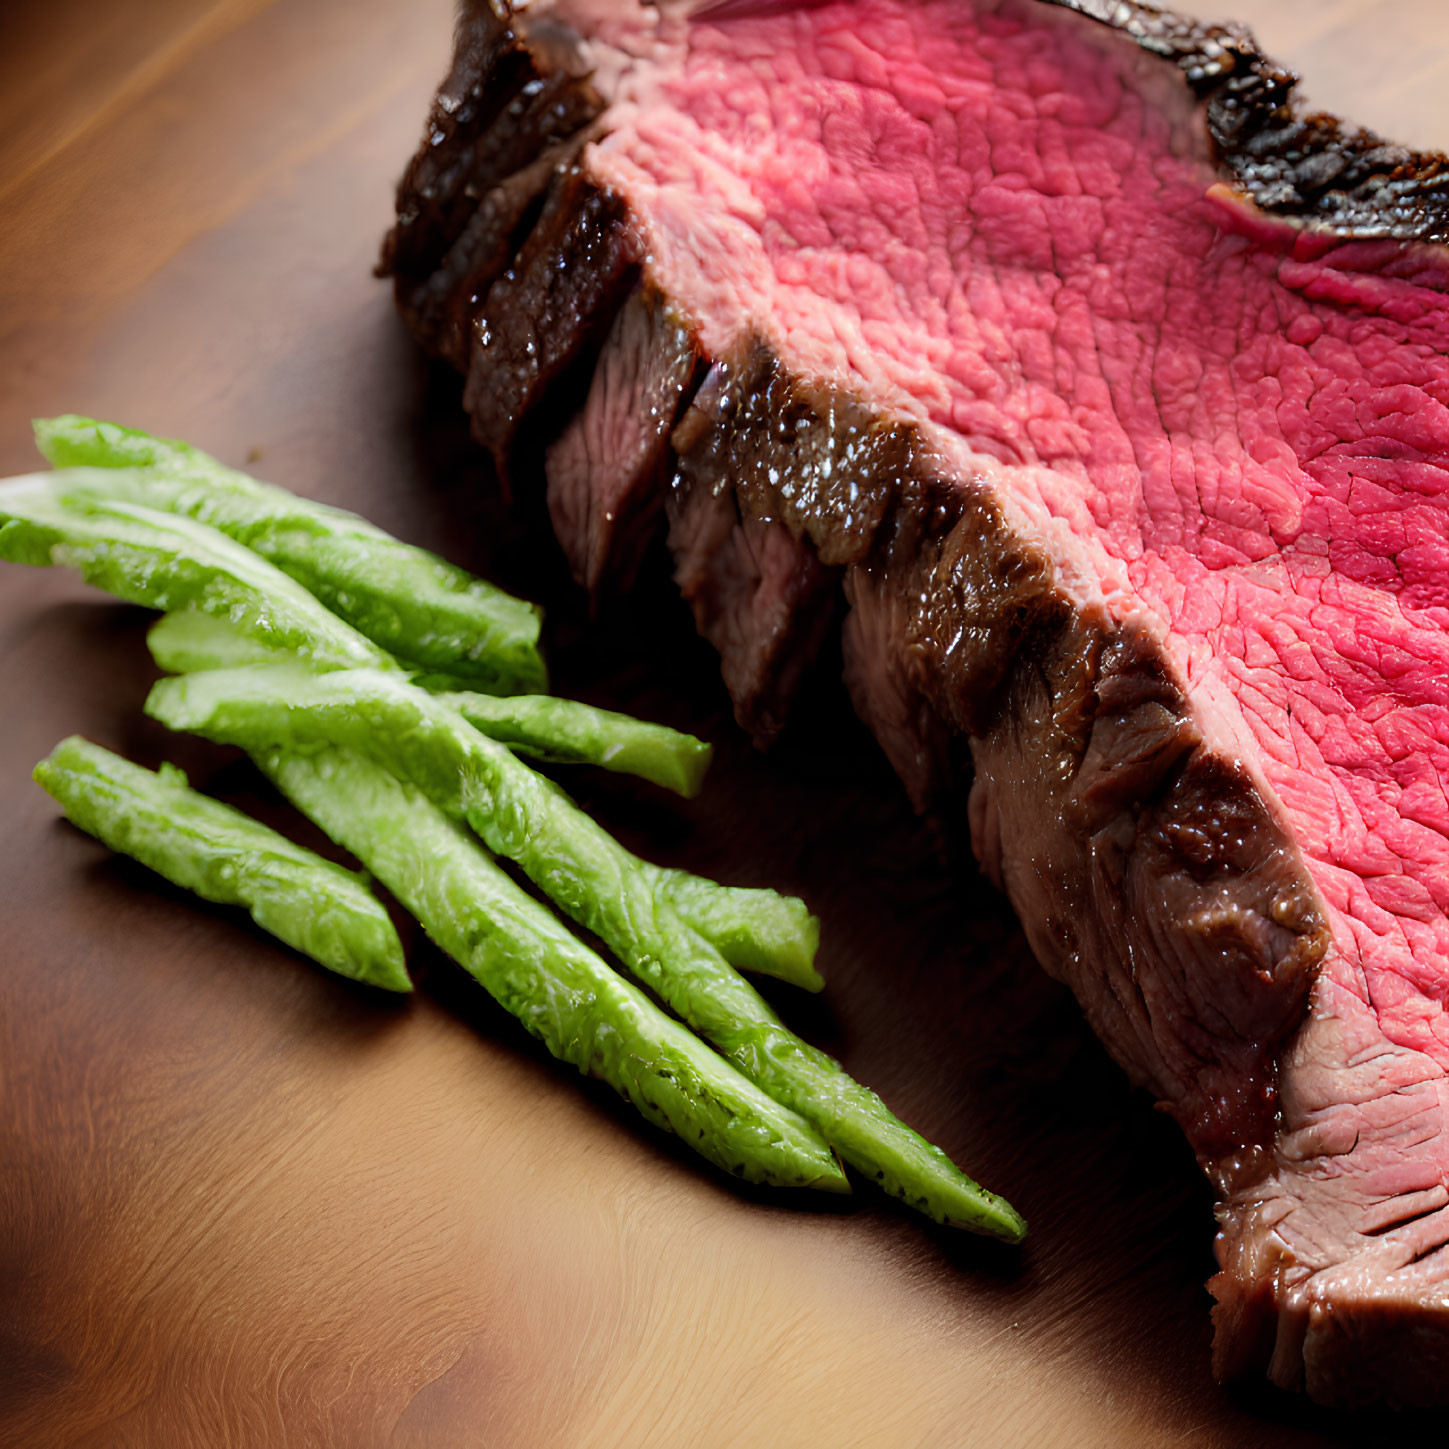 Medium-Rare Steak Slices with Pink Center and Asparagus on Wooden Board